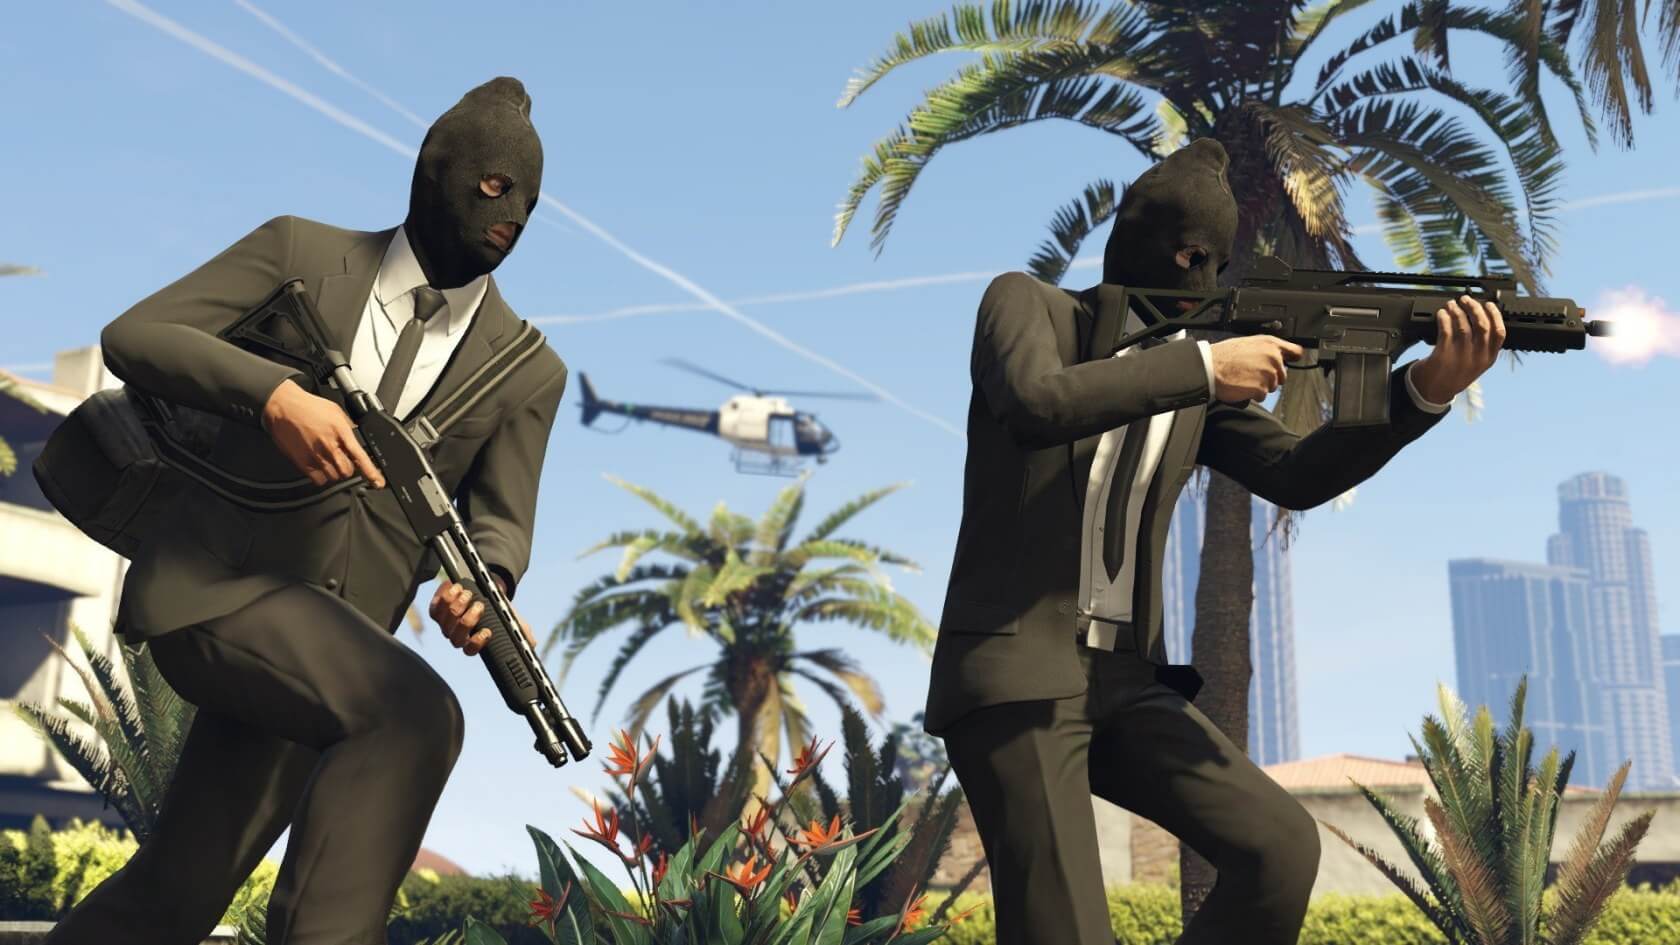 GTA Online's 'Elusive' cheat distributor has been hit with a $150,000 fine